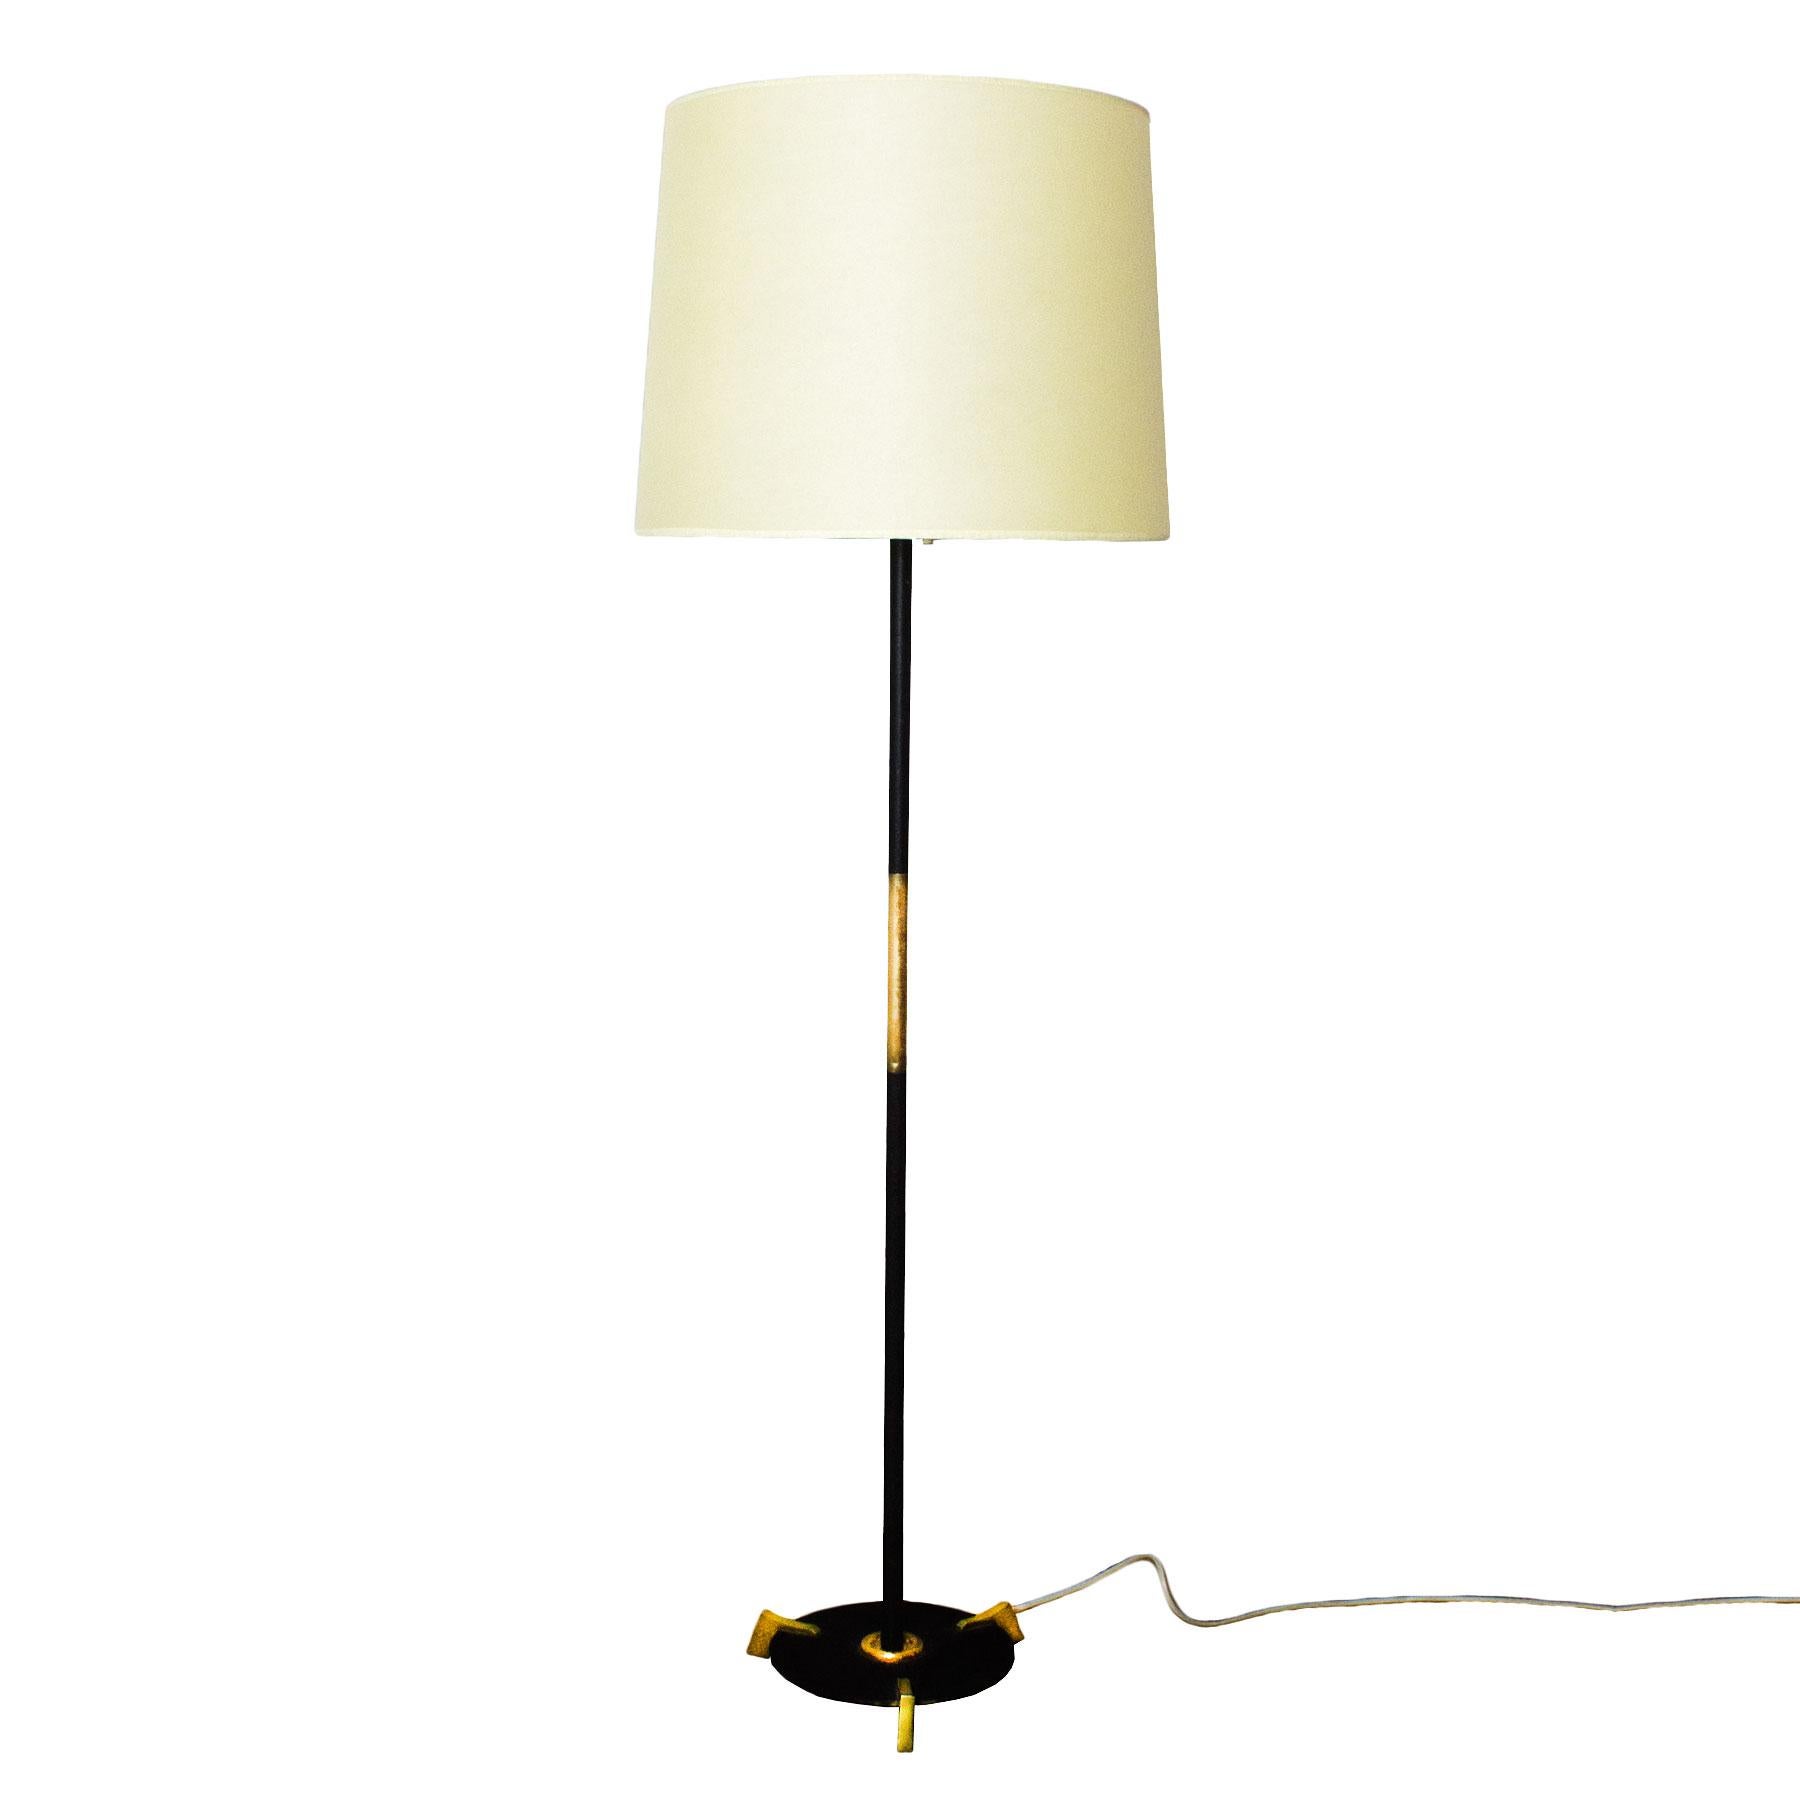 Standing lamp, black lacquered steel and polished solid brass, beige lampshade.
Spain, circa 1950.